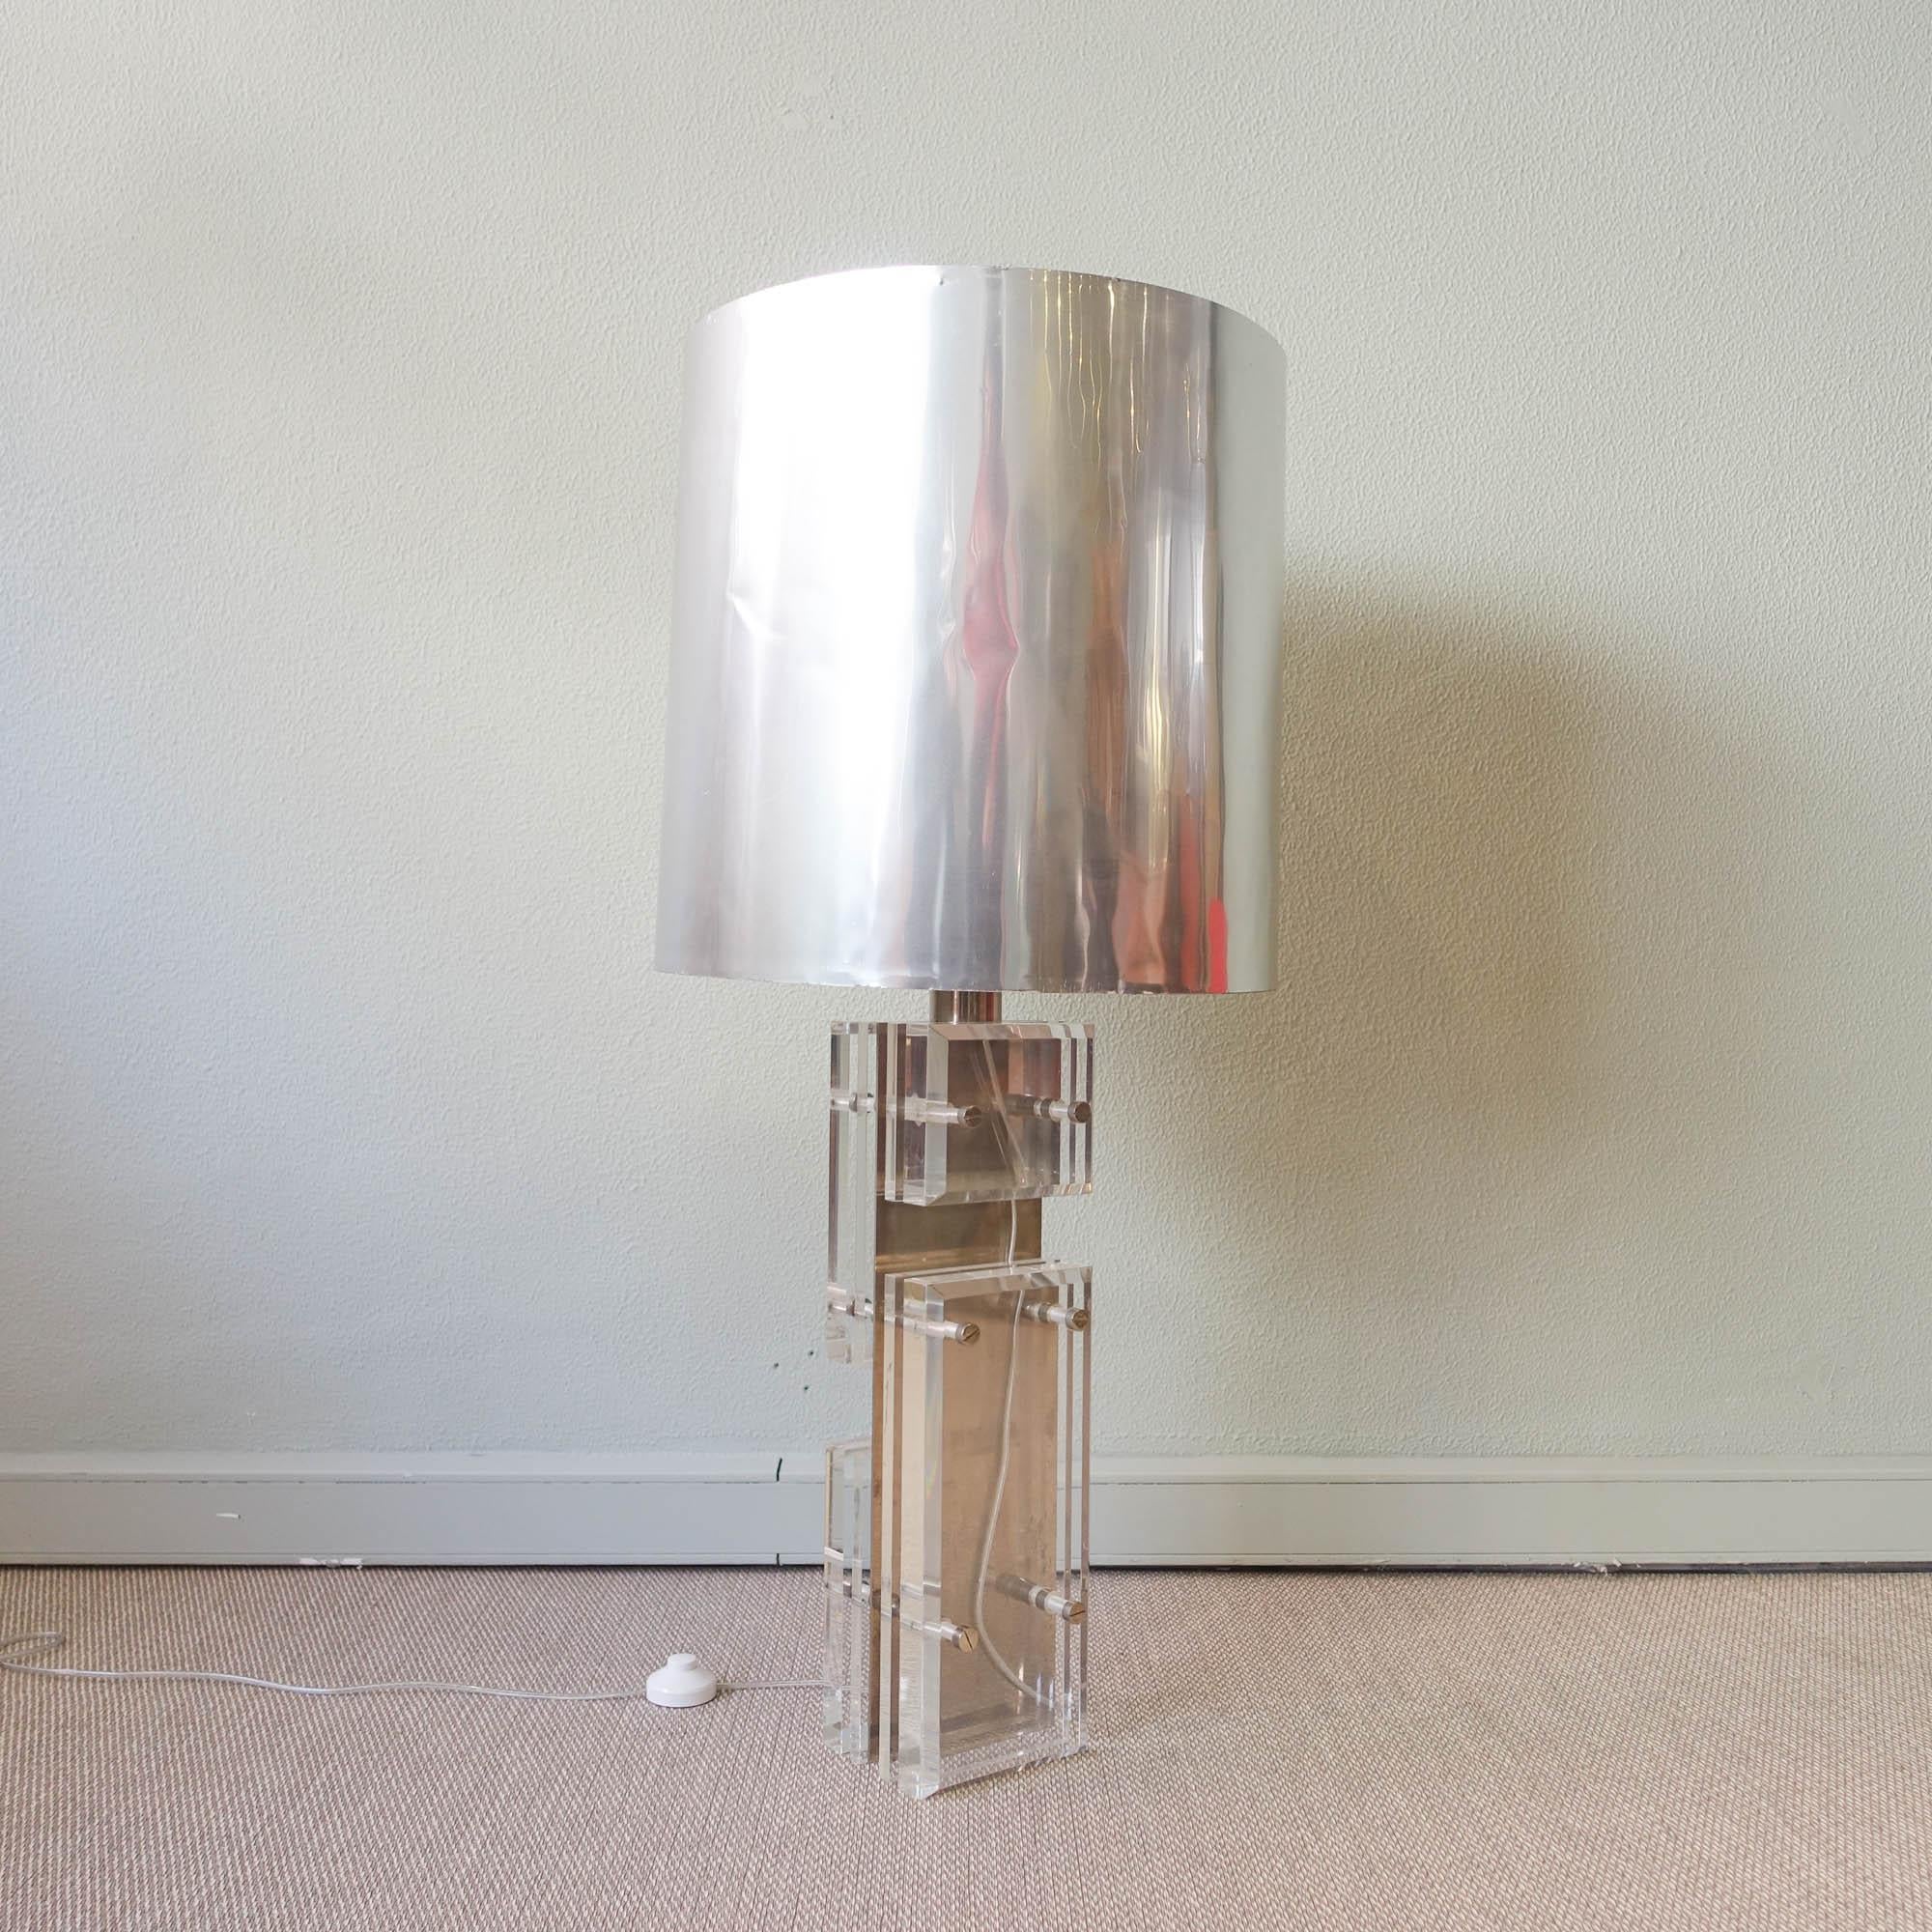 Big Lucite and Polished Aluminum Table / Floor Lamp by Willy Rizzo for Noel B.C 1